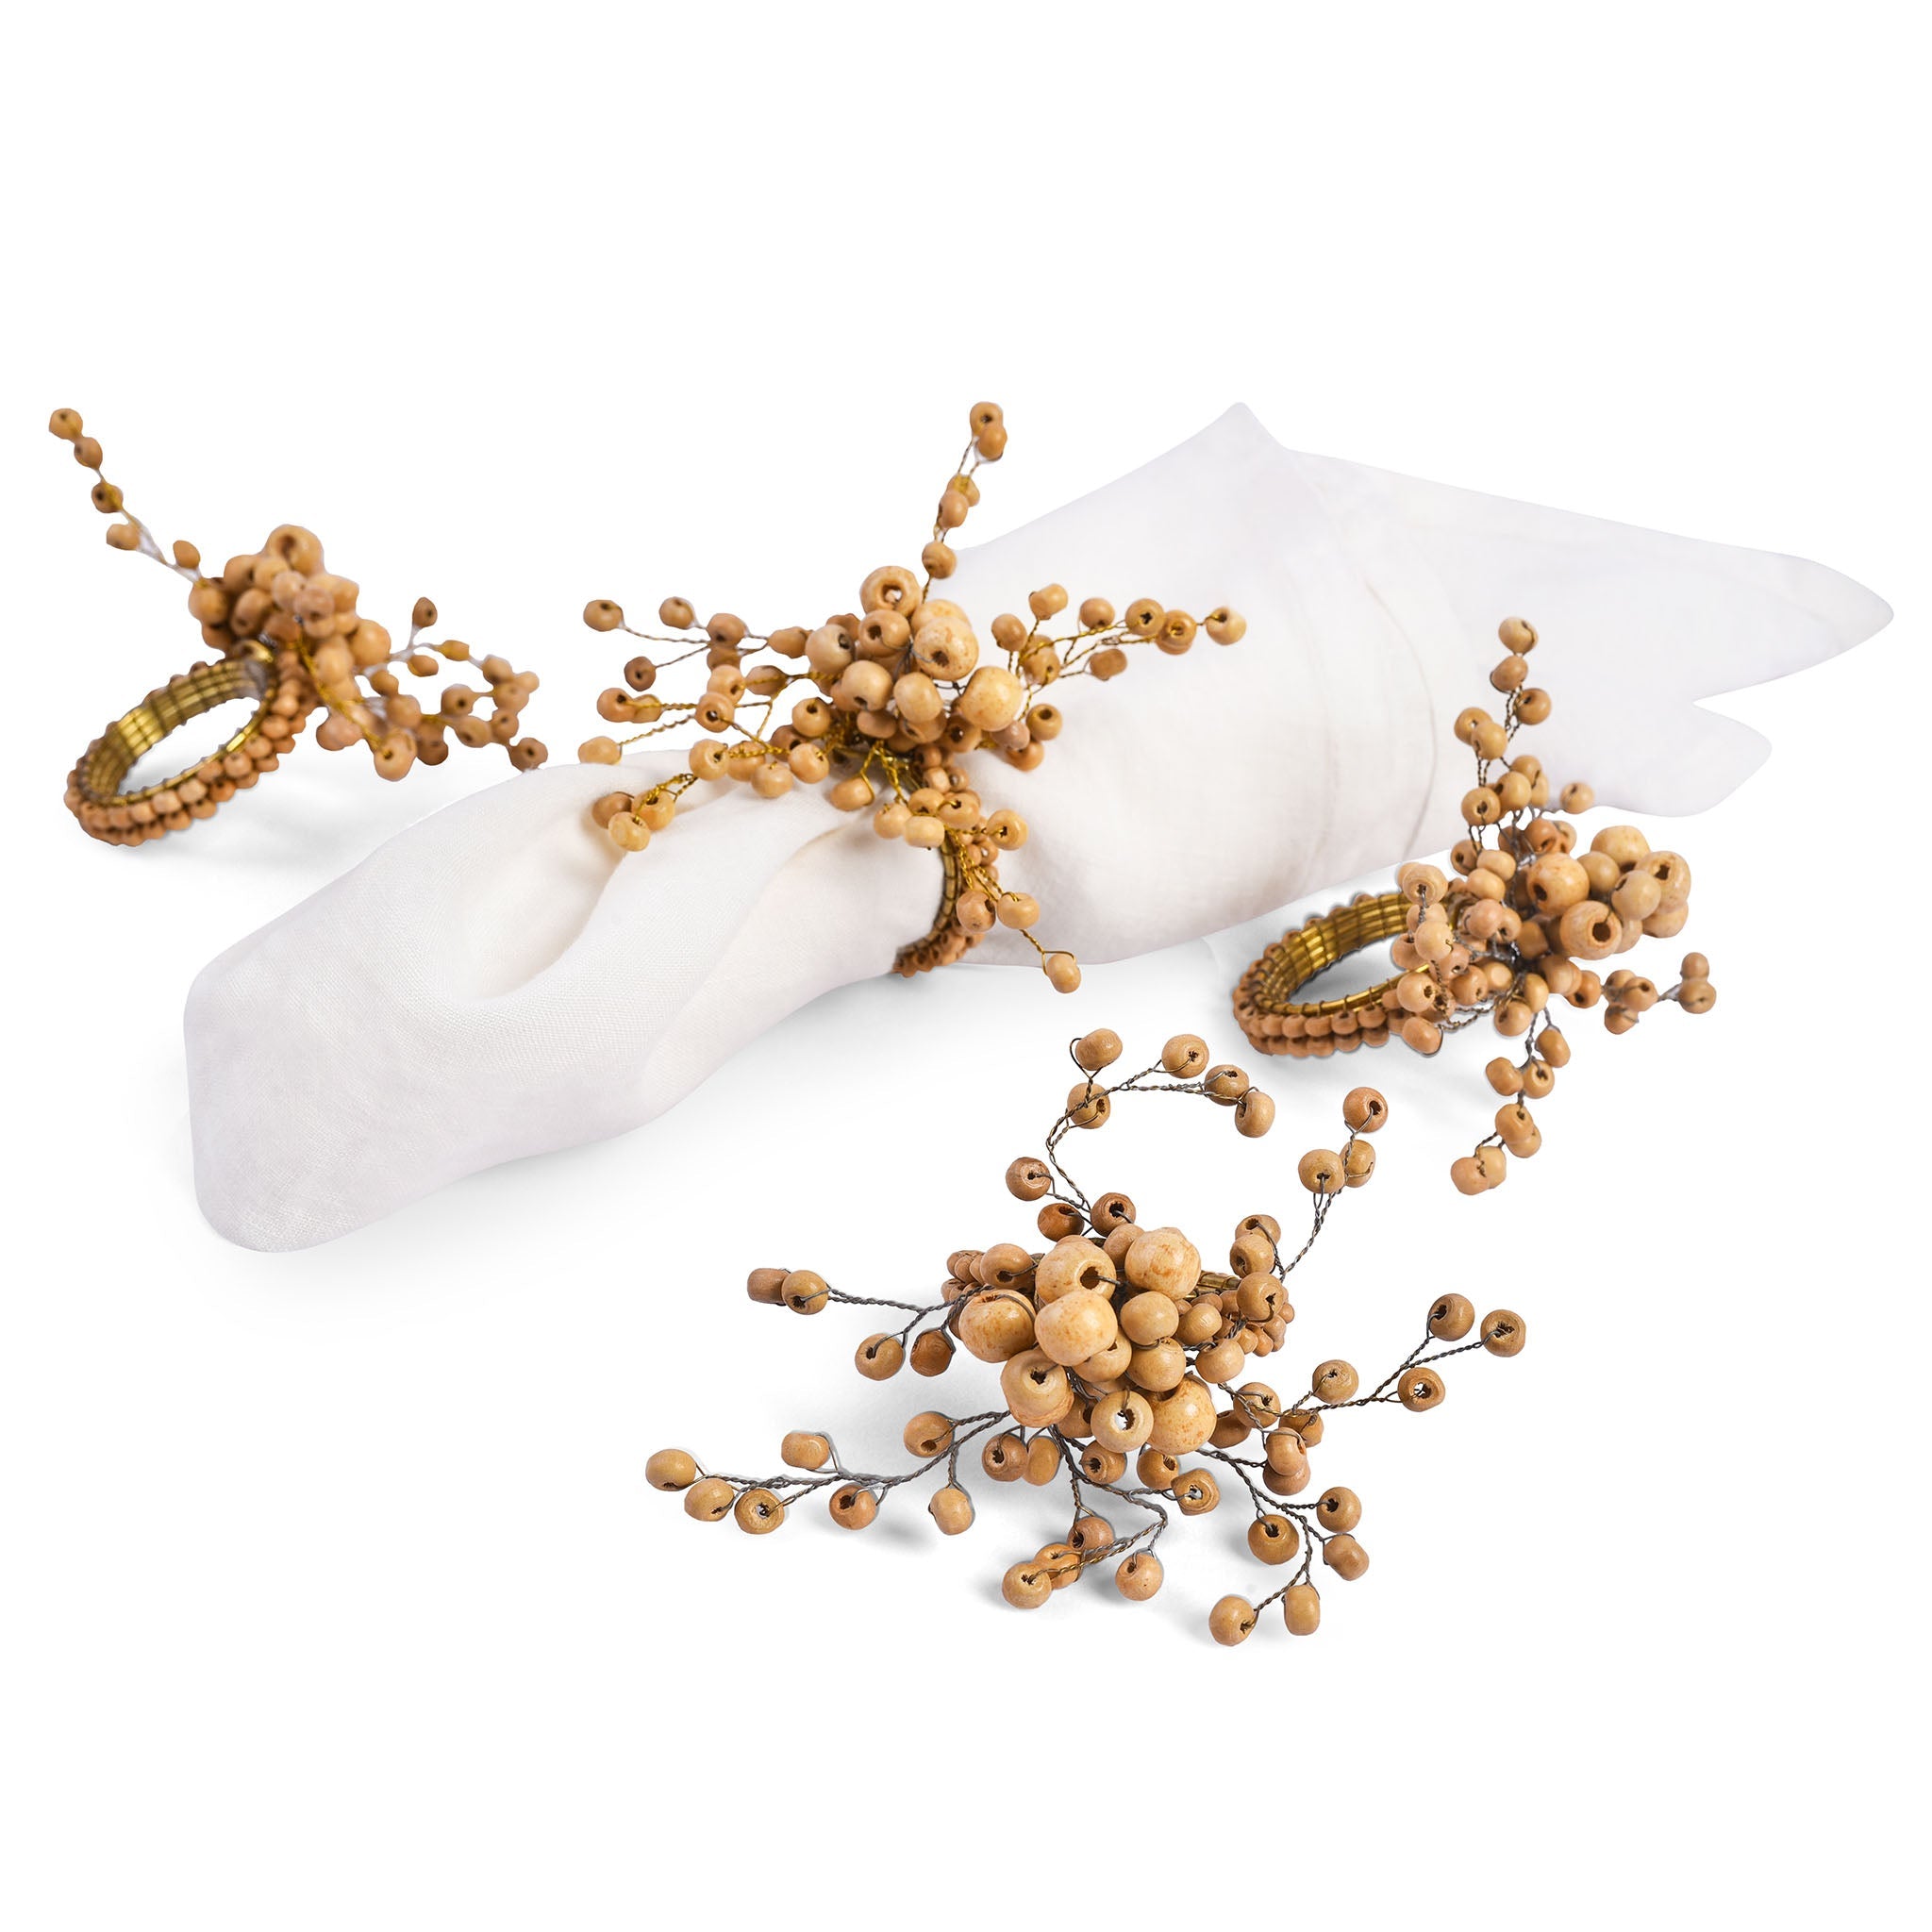 DiVine Wood Beaded Napkin Ring in Natural, Set of 4